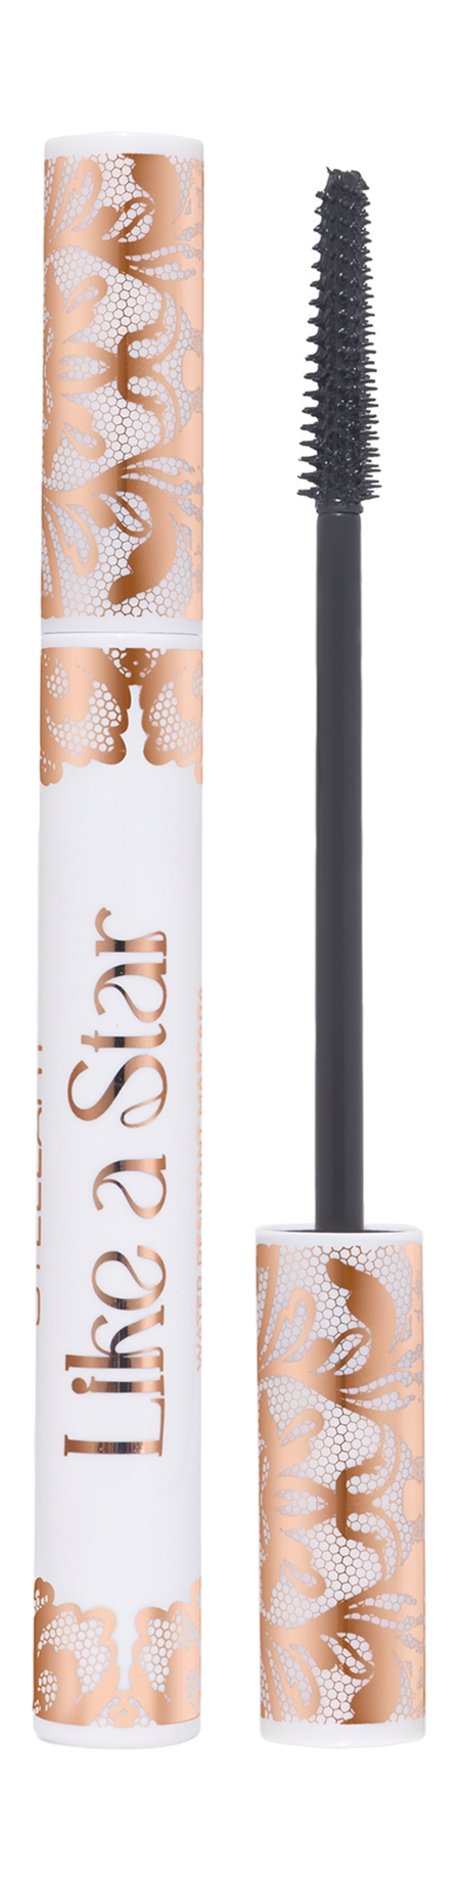 stellary golden lace water resistant mascara